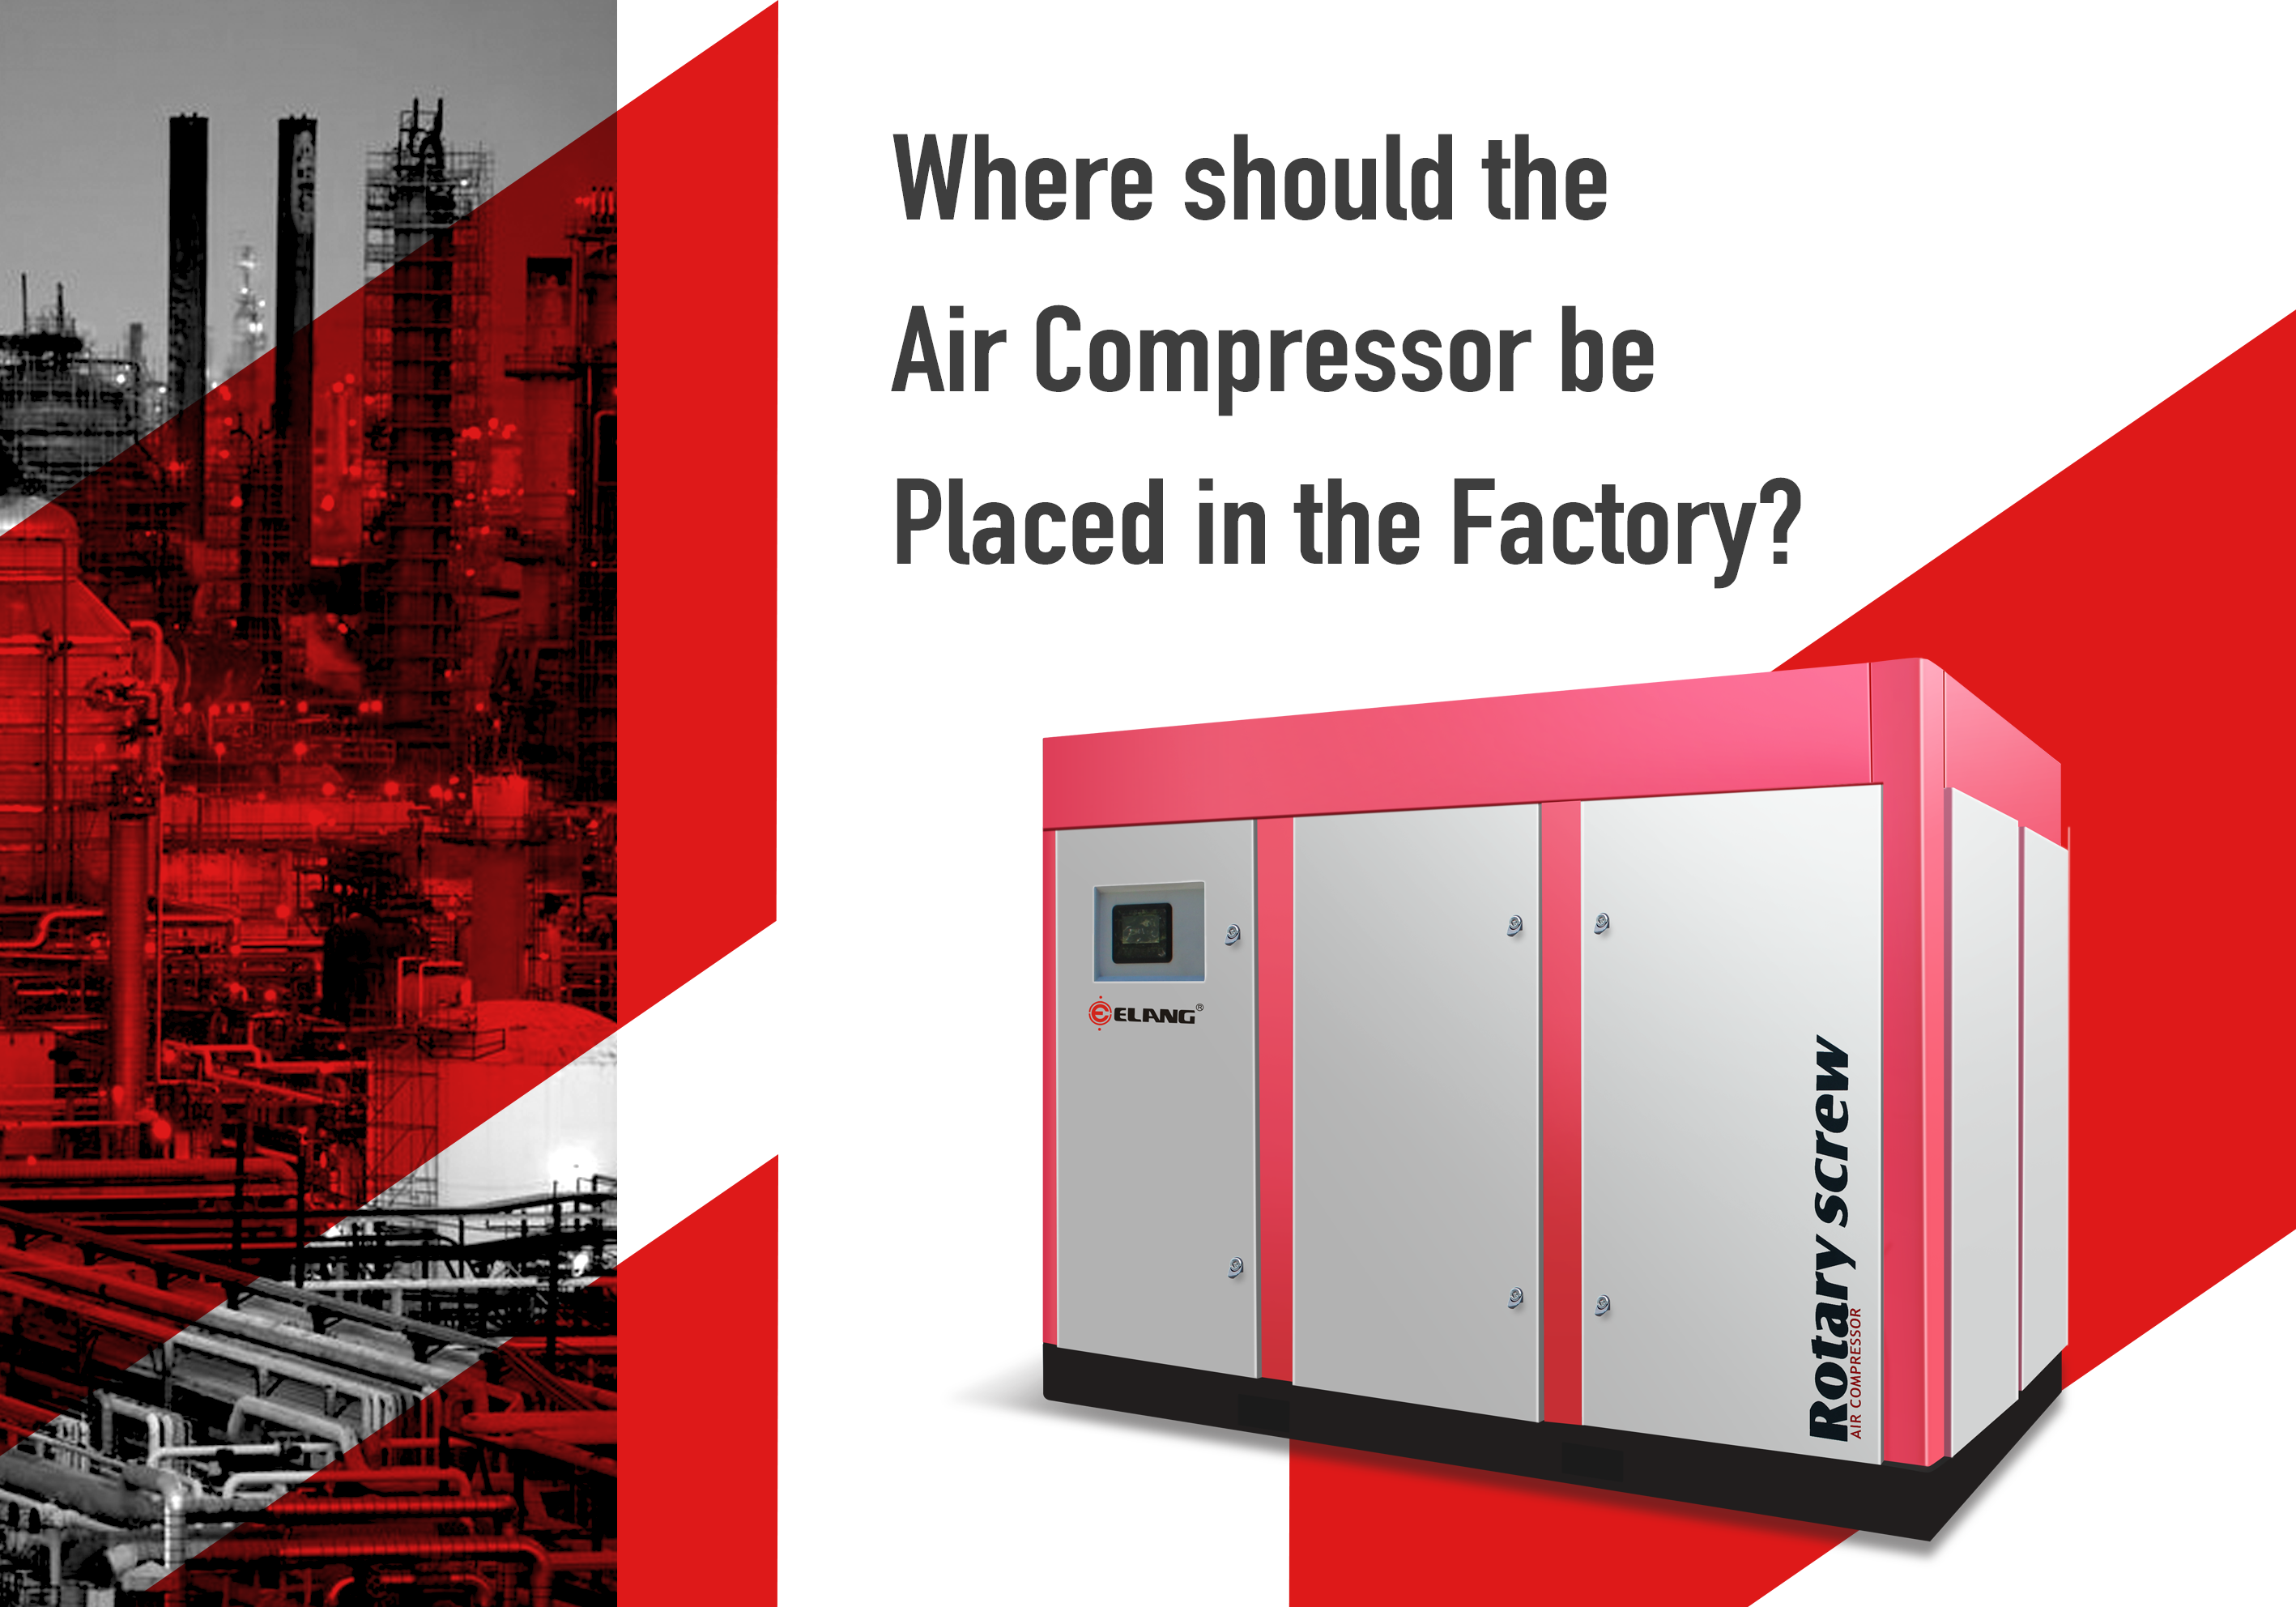 Where should the Air Compressor be Placed in the Factory